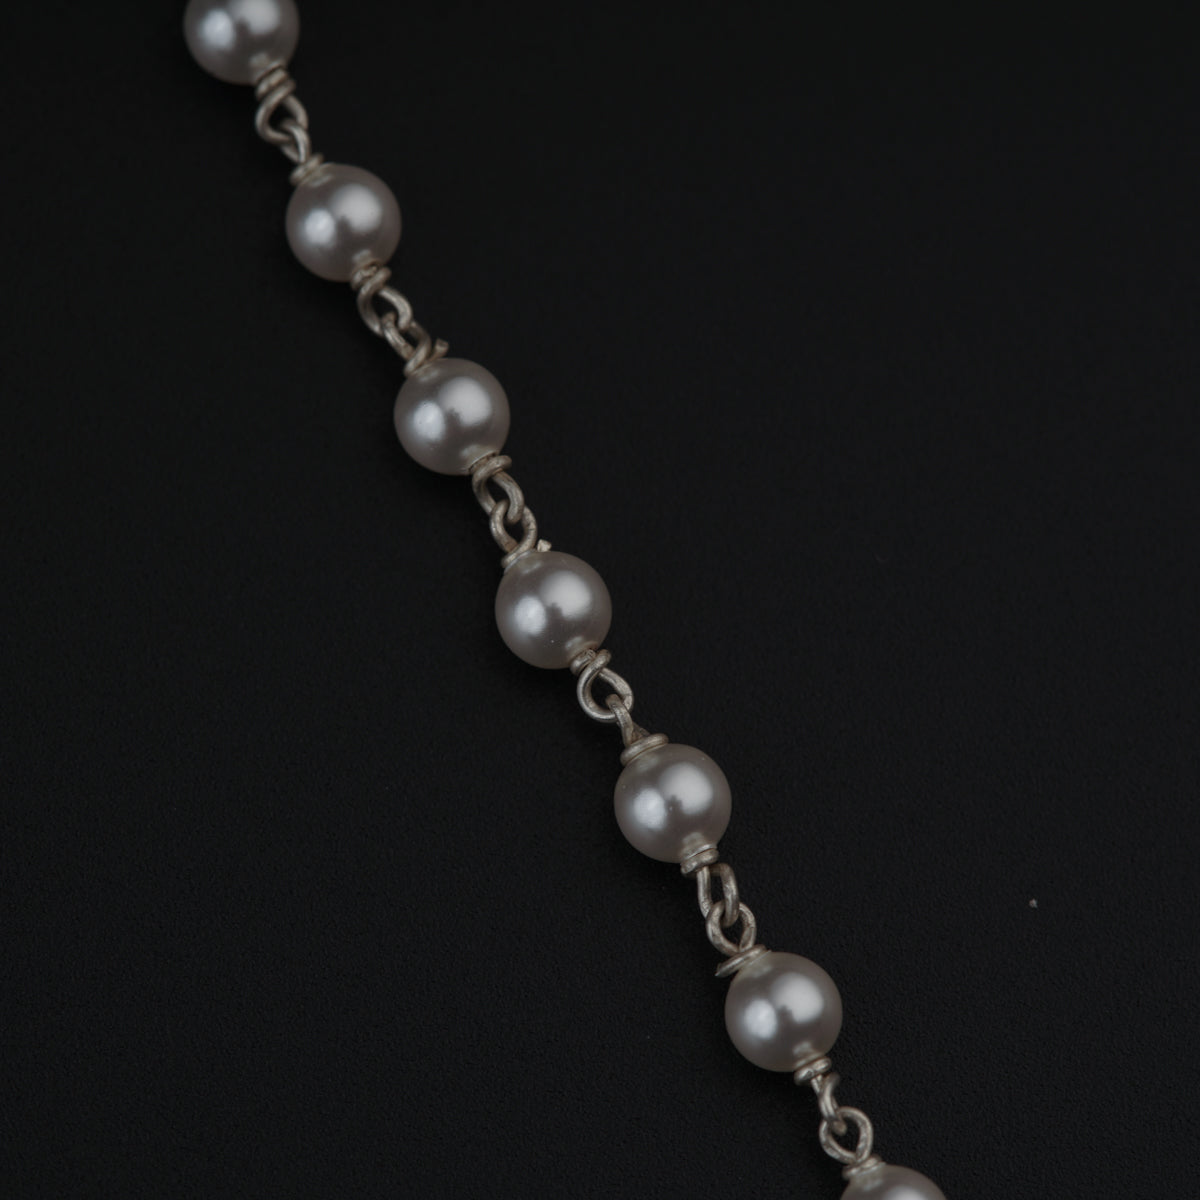 Silver Coin Necklace with Pearls